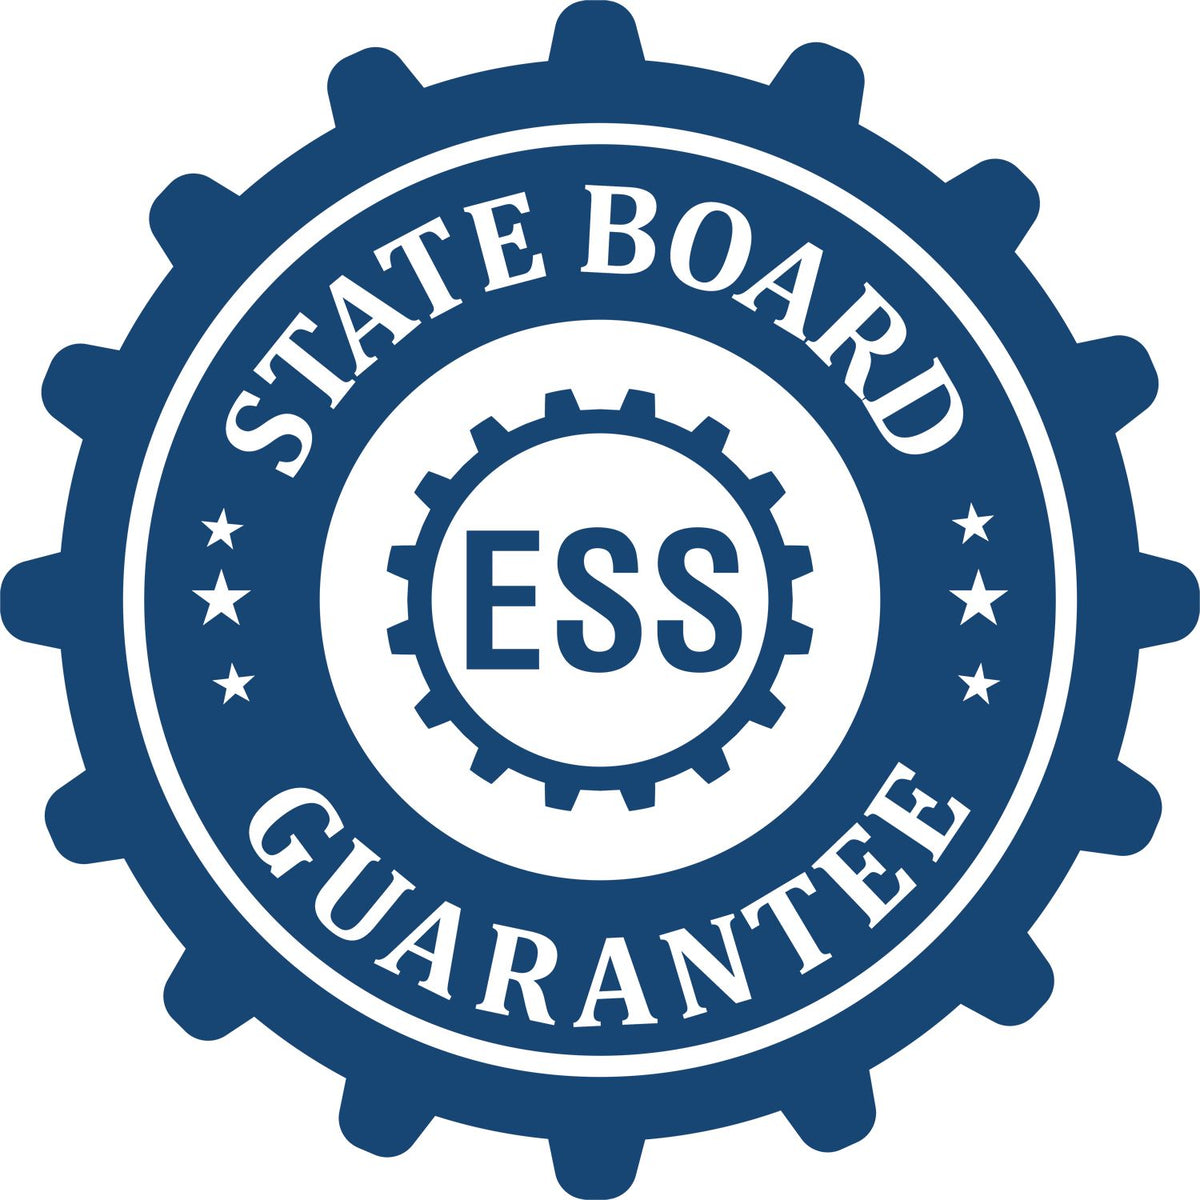 An emblem in a gear shape illustrating a state board guarantee for the Premium MaxLight Pre-Inked District of Columbia Landscape Architectural Stamp product.